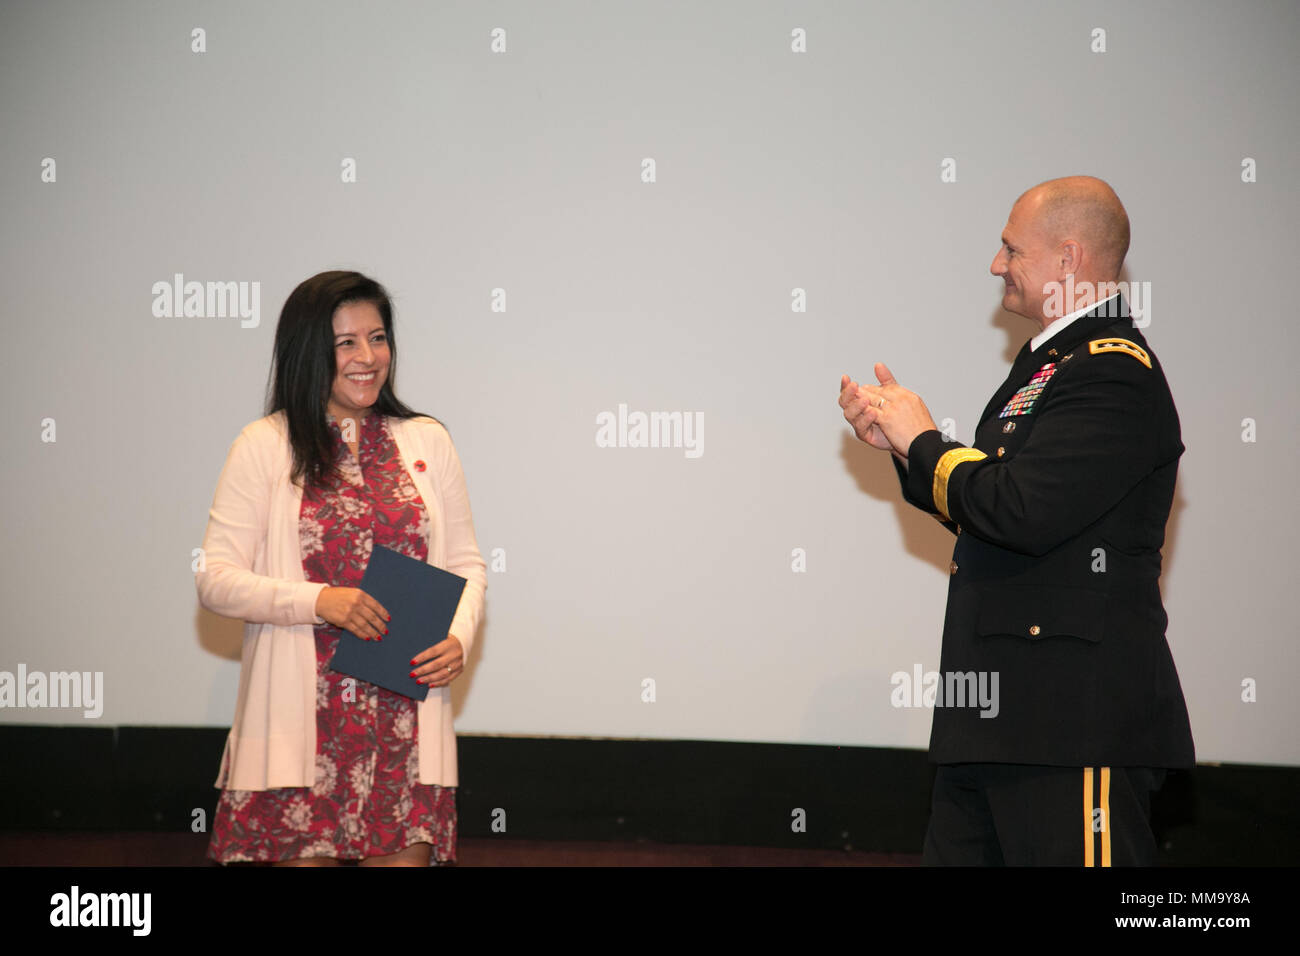 U.S. Army Lt. Gen. Edward Daly, Army Materiel Command deputy commander and Redstone senior commander, presents an award to Christine Chavez, the keynote speaker during the Hispanic-American Heritage Month Observance Sept. 25, 2017 at Redstone Arsenal, Alabama.  Chavez is the granddaughter of labor leader and civil rights activist Cesar Chavez.  (U.S. Army photo by Sgt. 1st Class Teddy Wade) Stock Photo